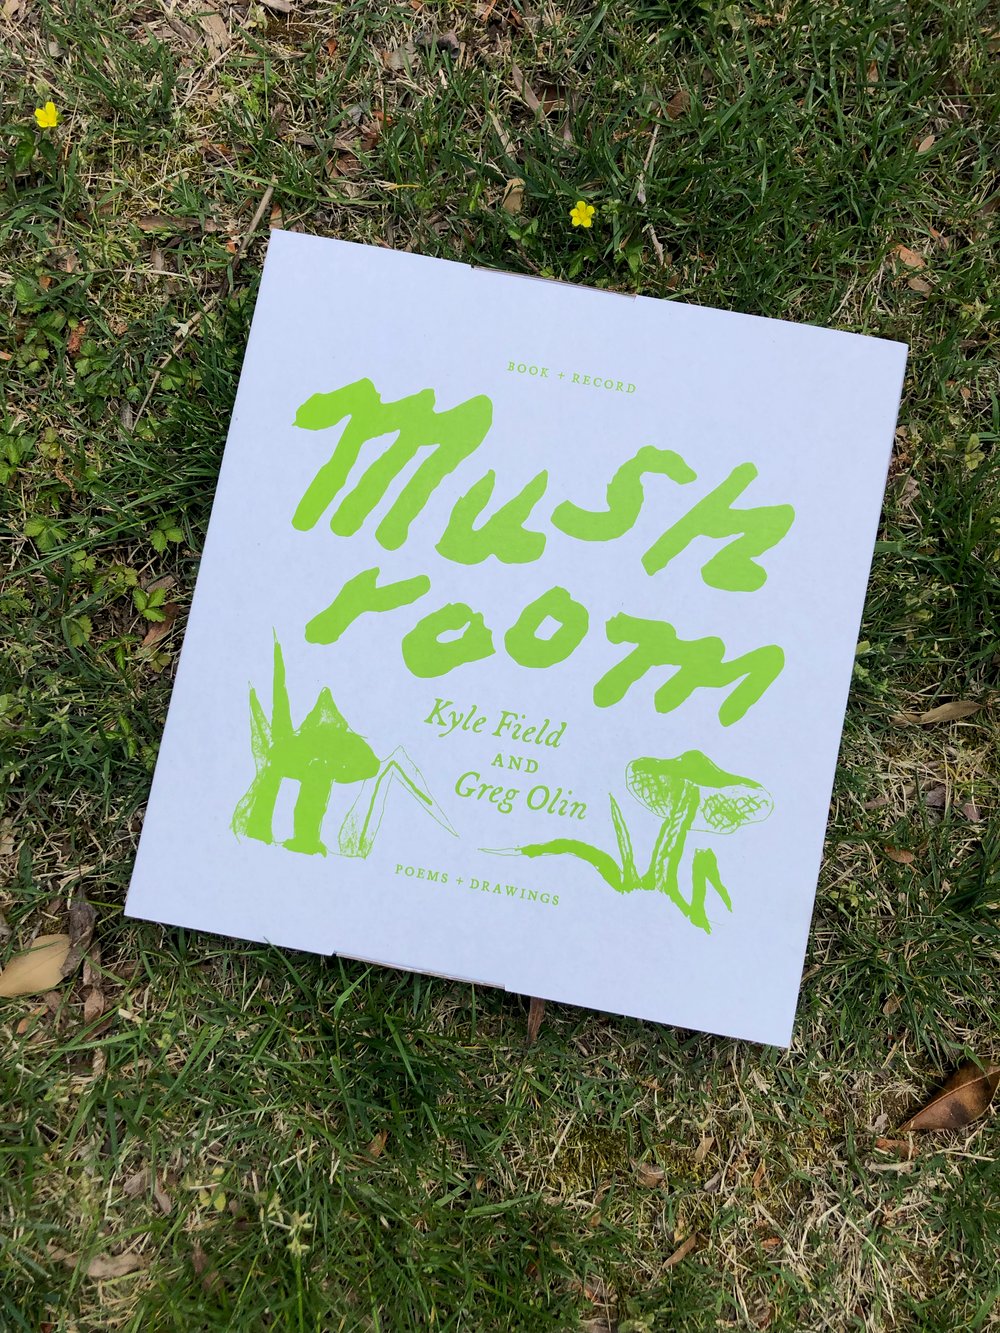 "Mushroom" Hardback Book and 12” Record in a Box by Kyle Field and Greg Olin